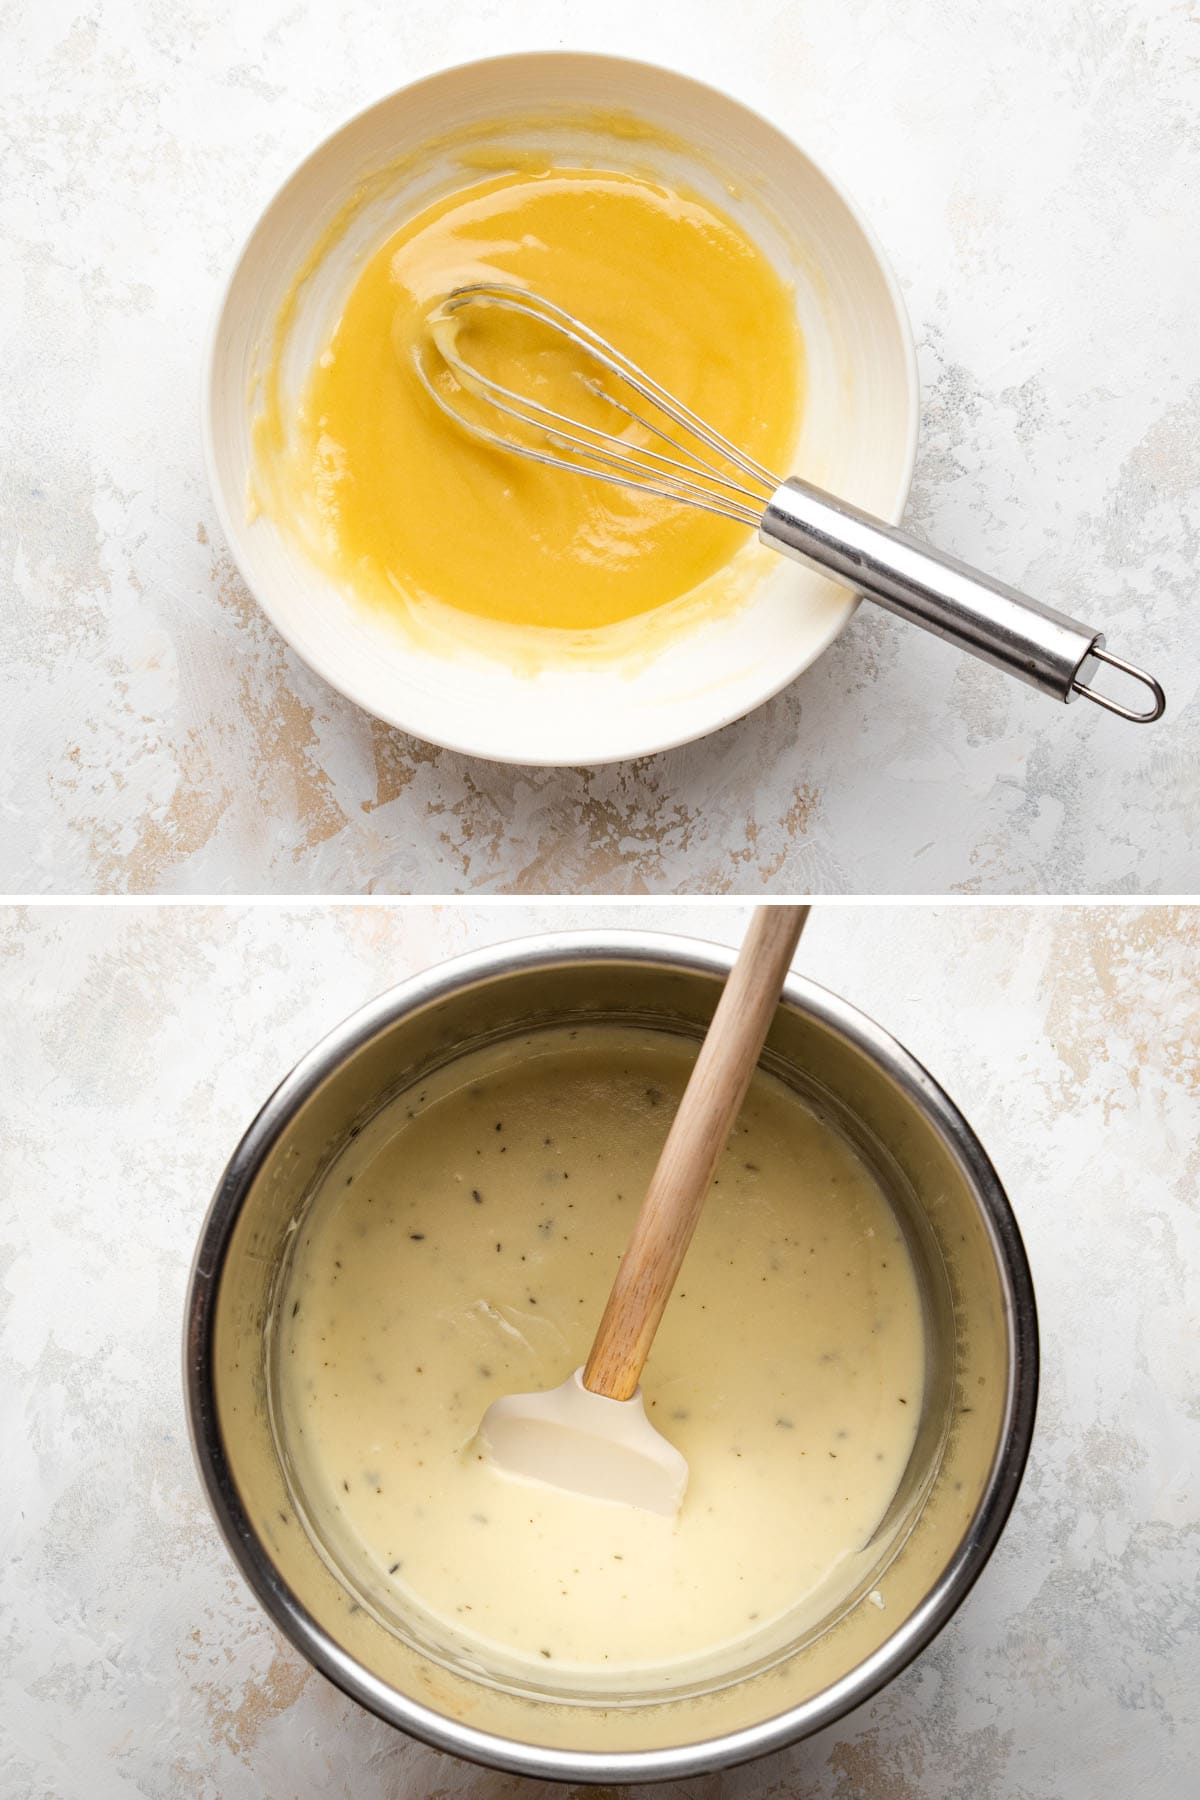 Melted butter and flour mixed together in a white bowl, over a photo of the finished sauce in the Instant Pot insert.